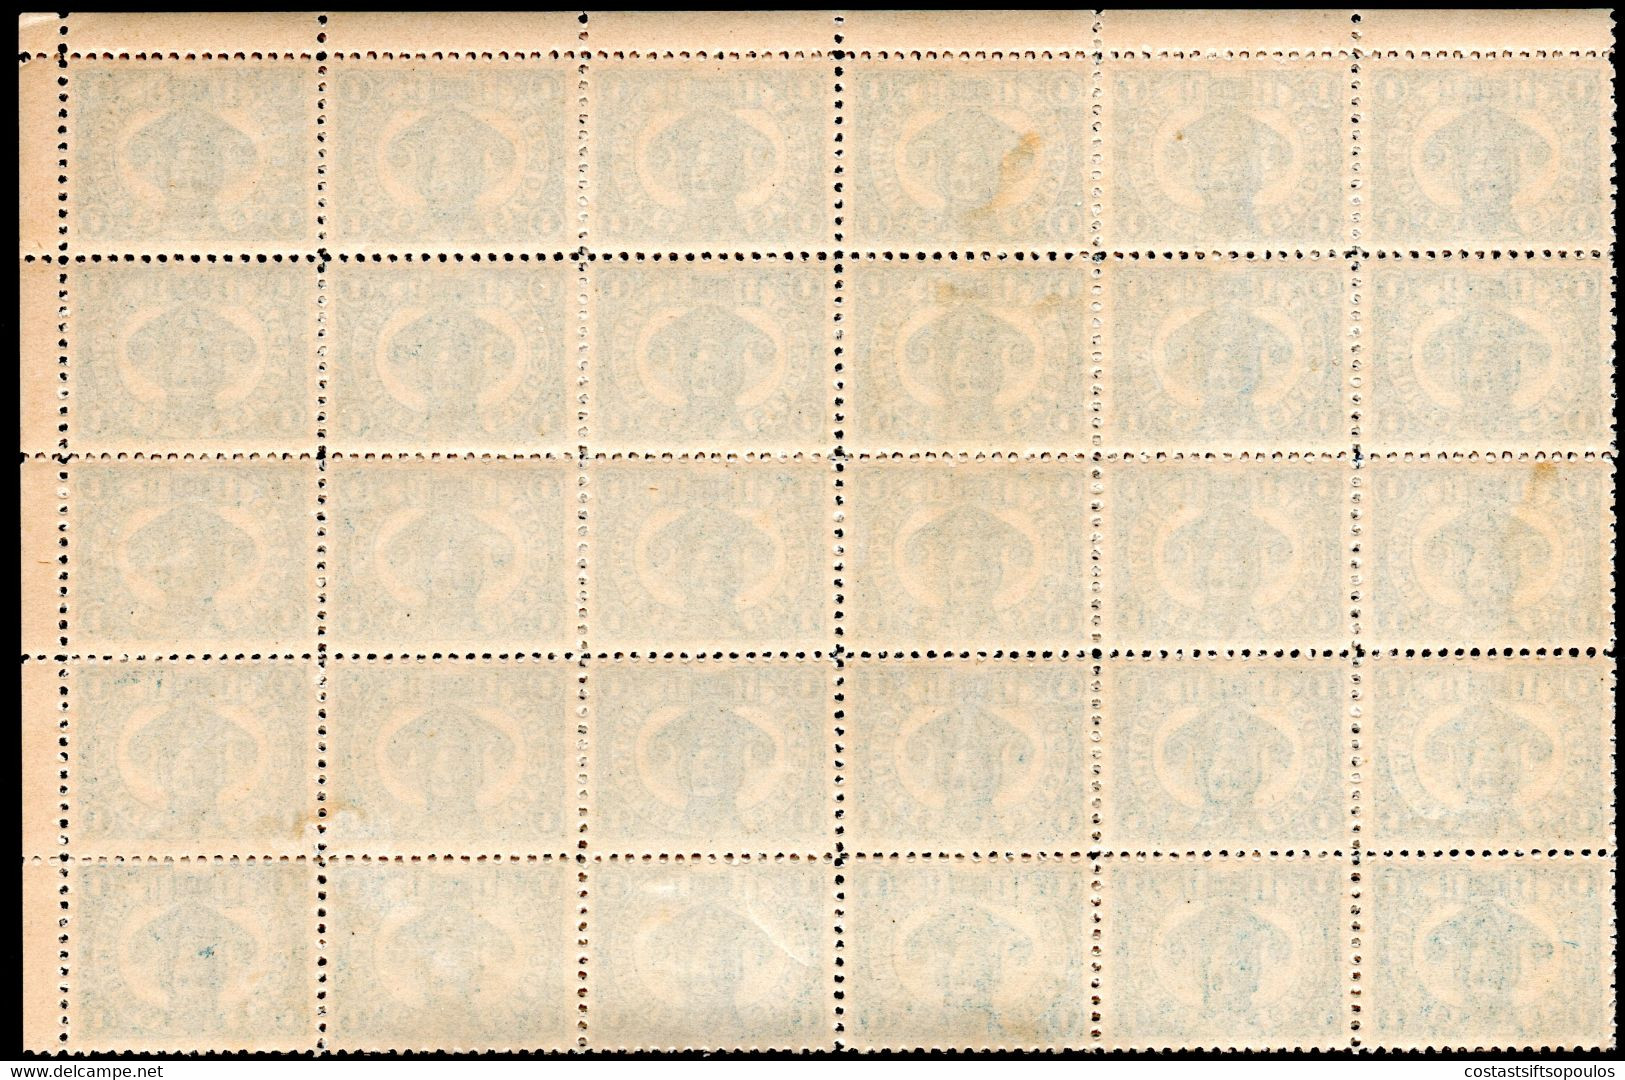 147.SWEDEN LOCAL,1887 STOCKHOLMS STADSPOST 1 ORE,MNH SHEET OF 60,FOLDED IN THE MIDDLE - Ortsausgaben